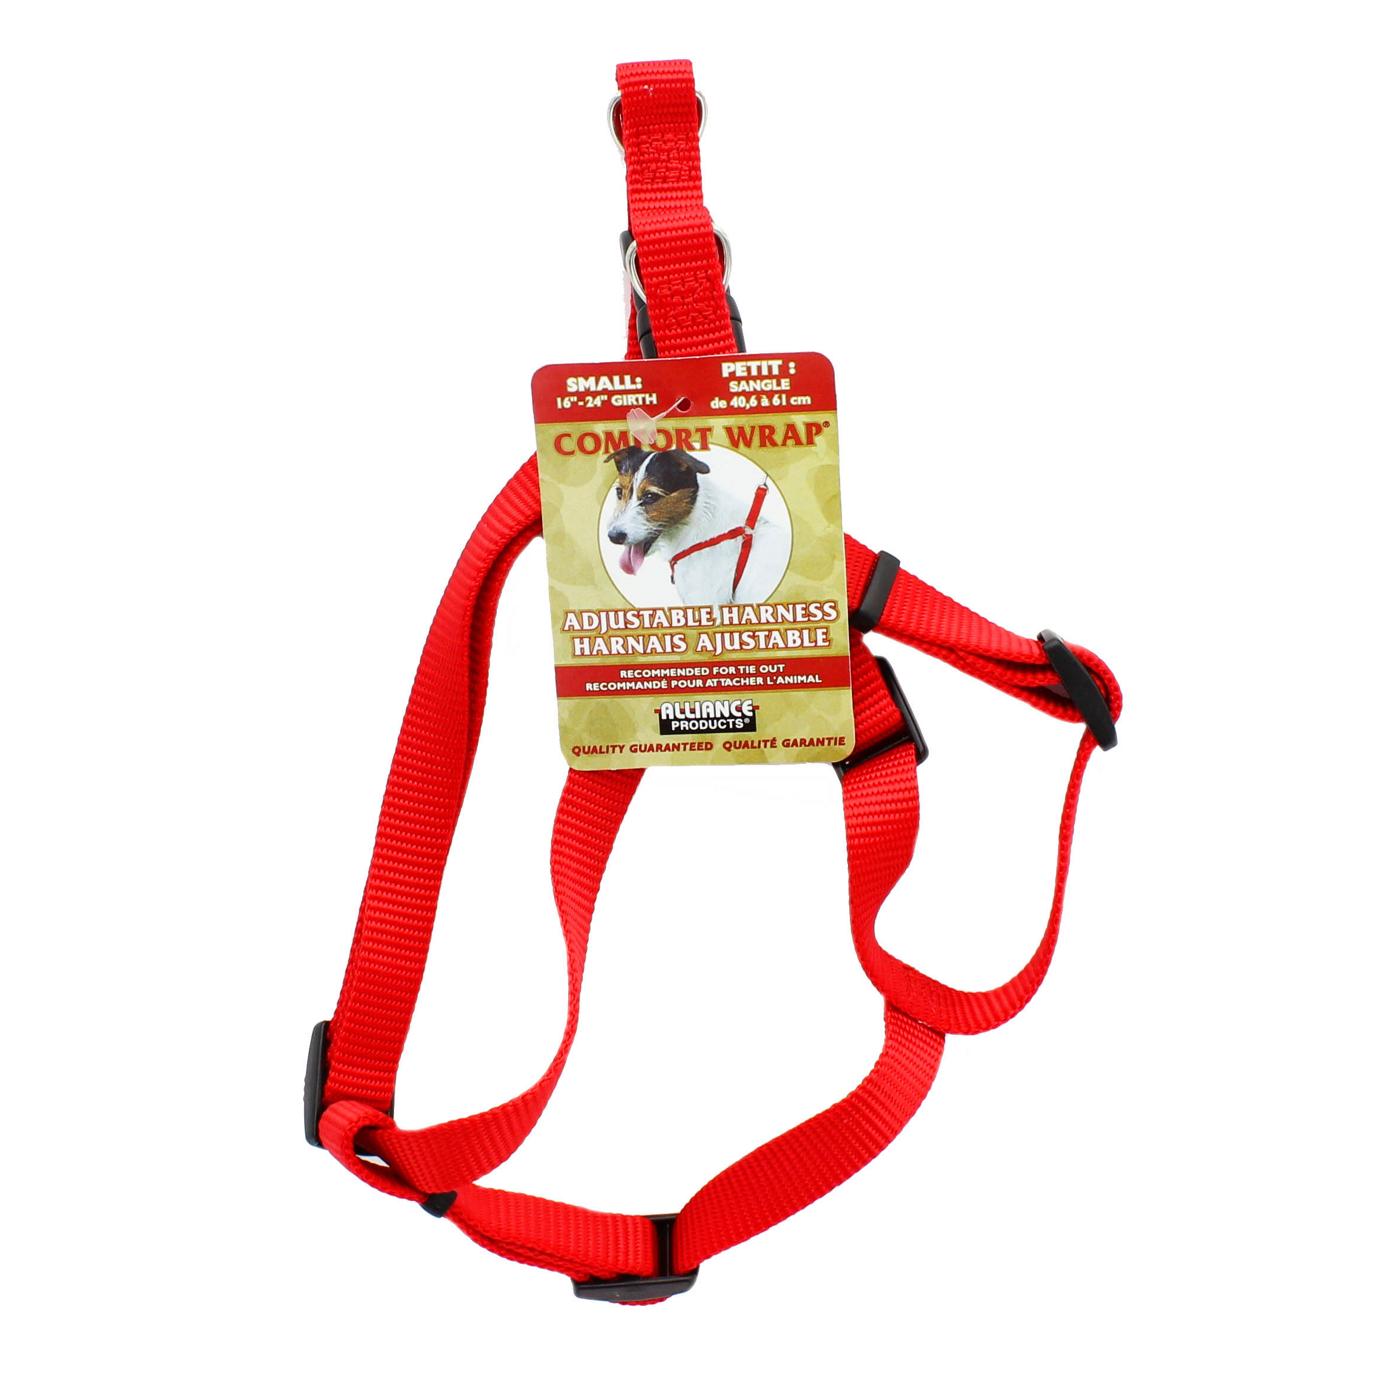 Alliance Comfort Wrap Small Harness Assorted Colors; image 1 of 3